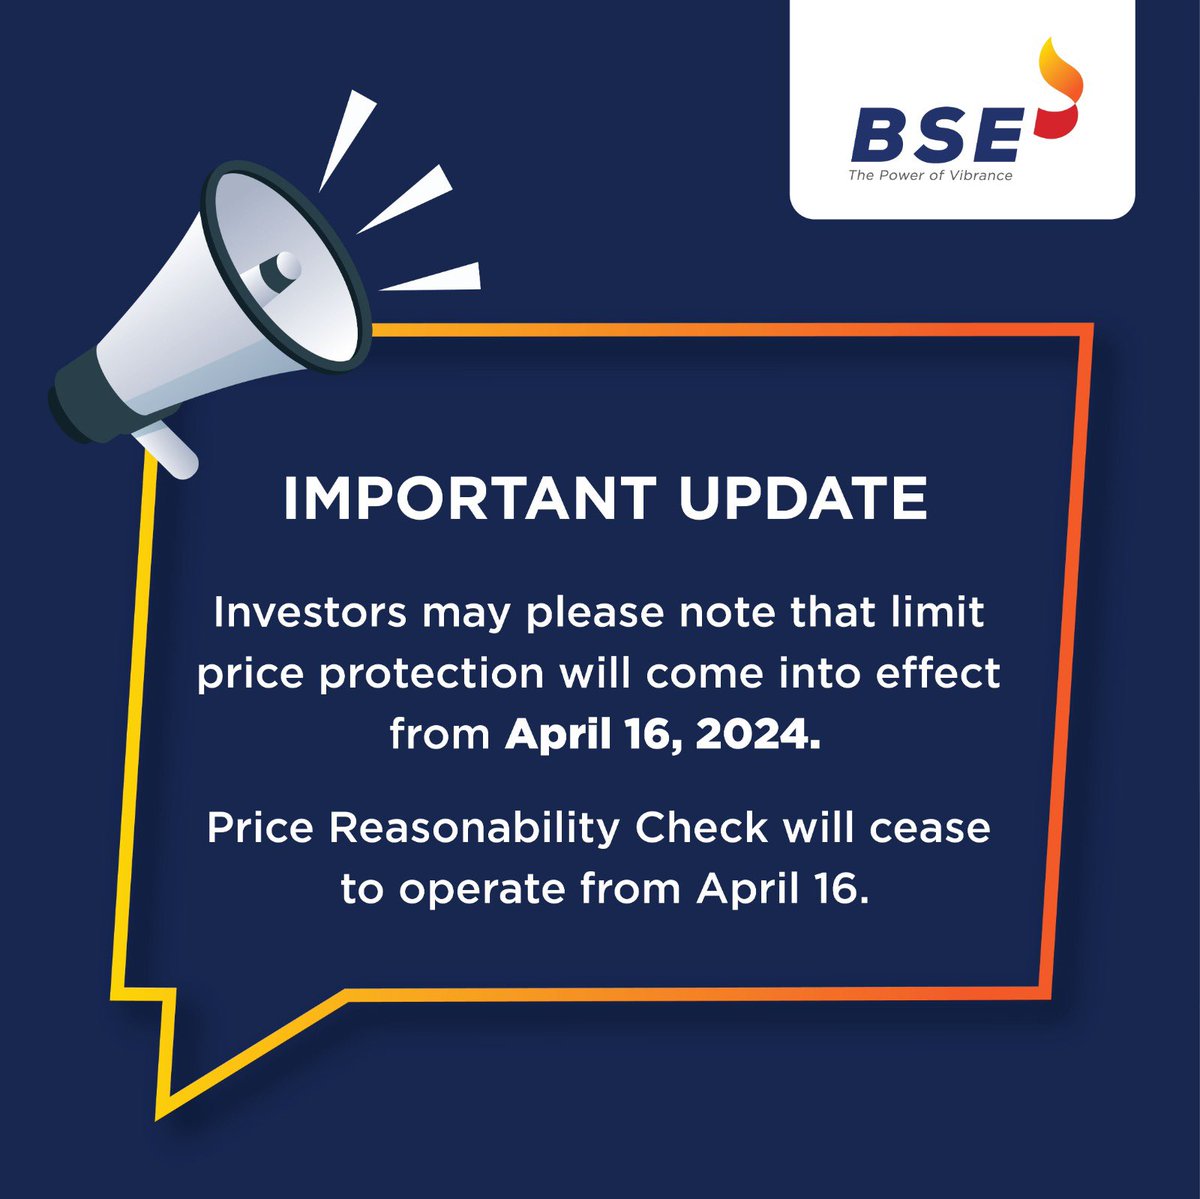 #ImportantUpdate Investors may please note that limit price protection will come into effect from April 16, 2024. Price Reasonability Check will cease to operate from April 16. bseindia.com/markets/Market…